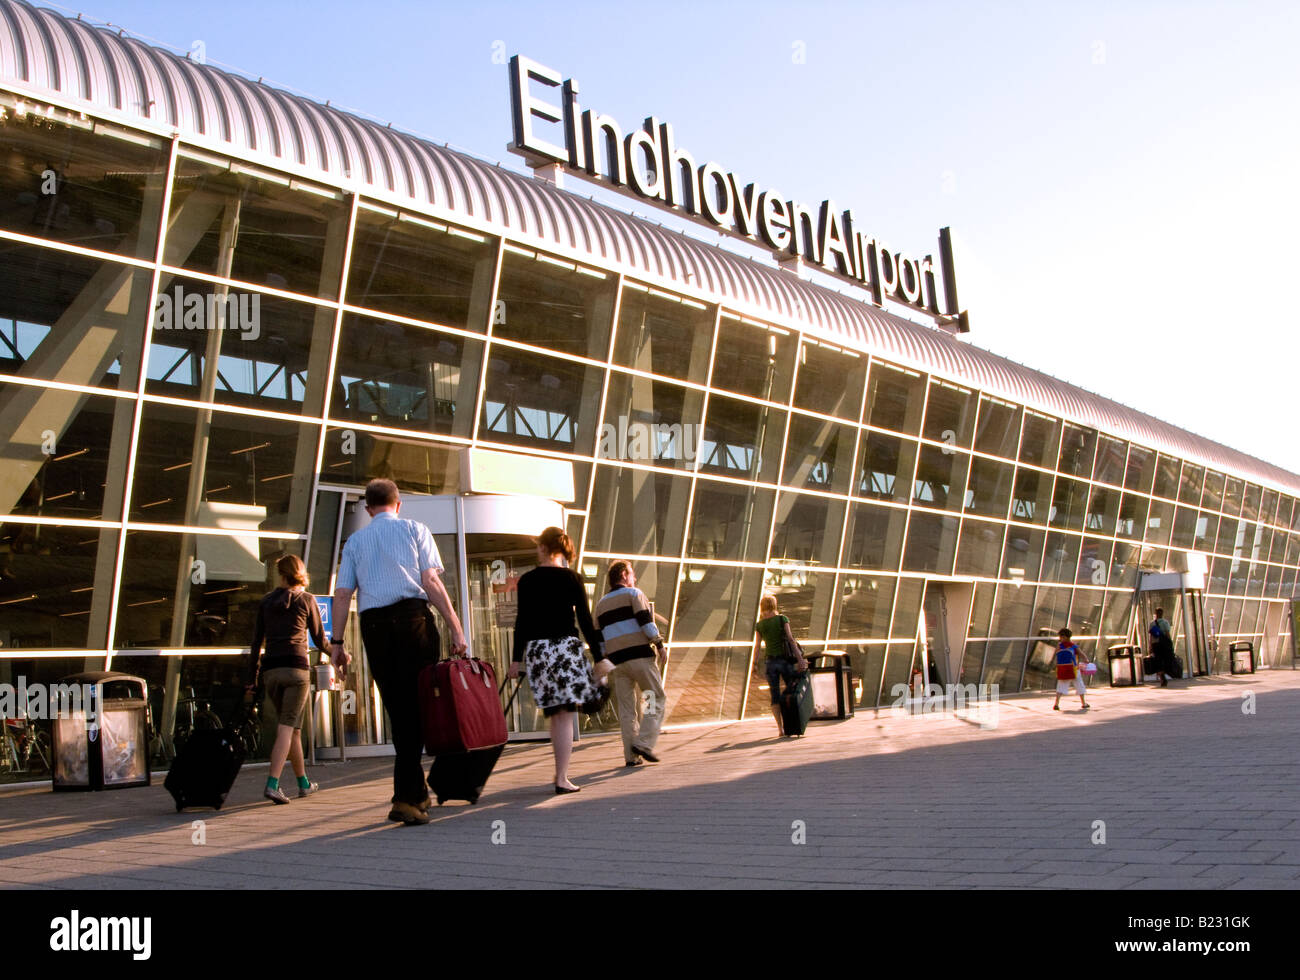 Eindhoven Airport Netherlands In number of passengers the second airport of the Netherlands after Schiphol Stock Photo